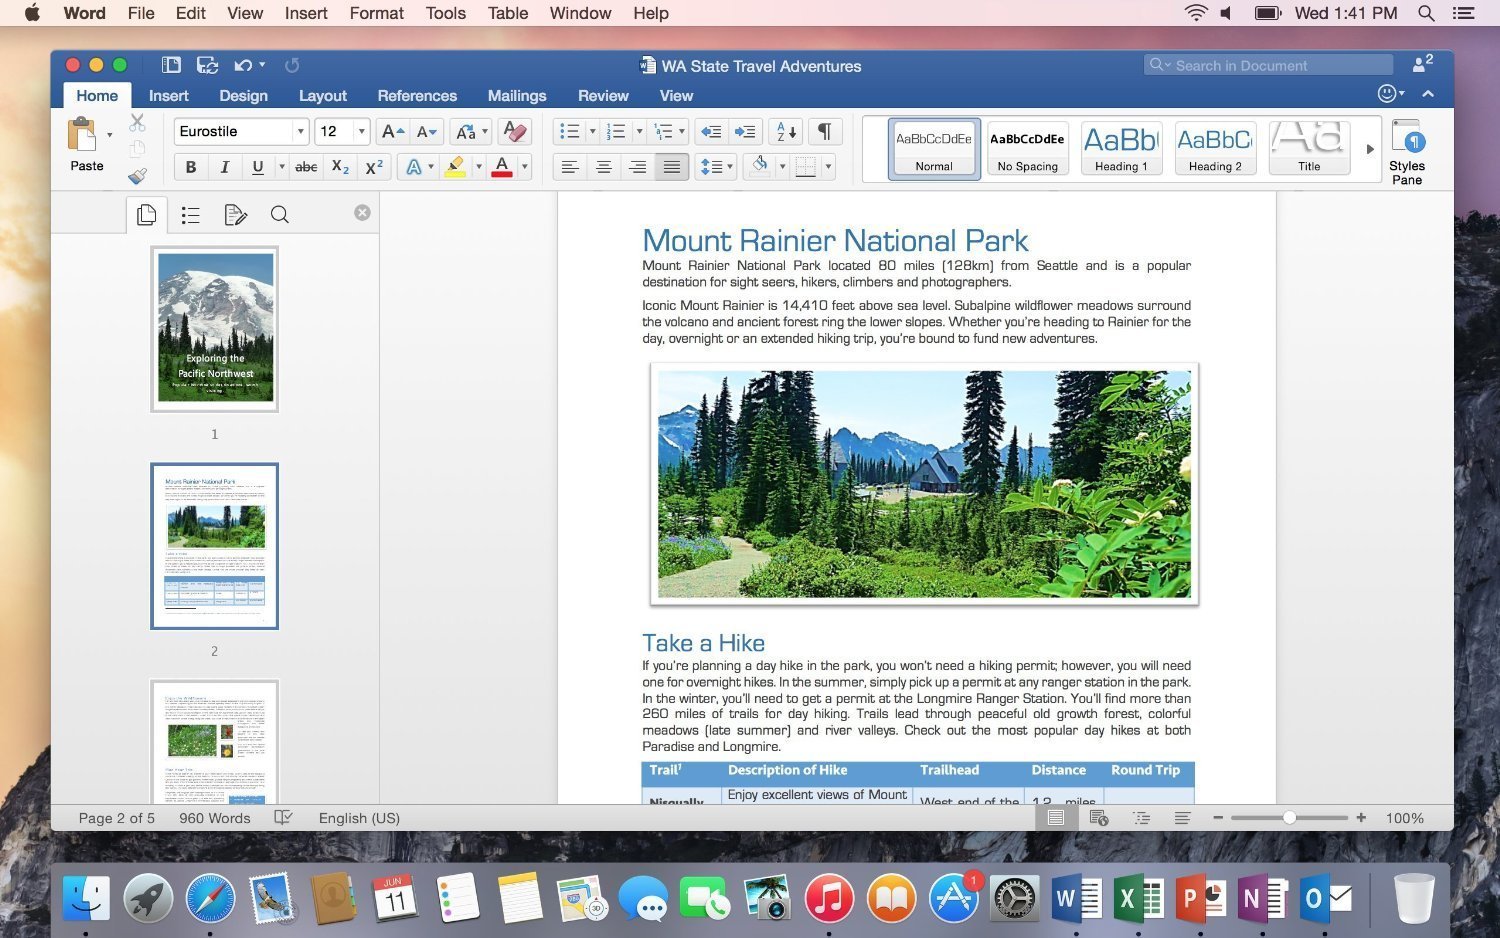 microsoft office 2011 for mac full download